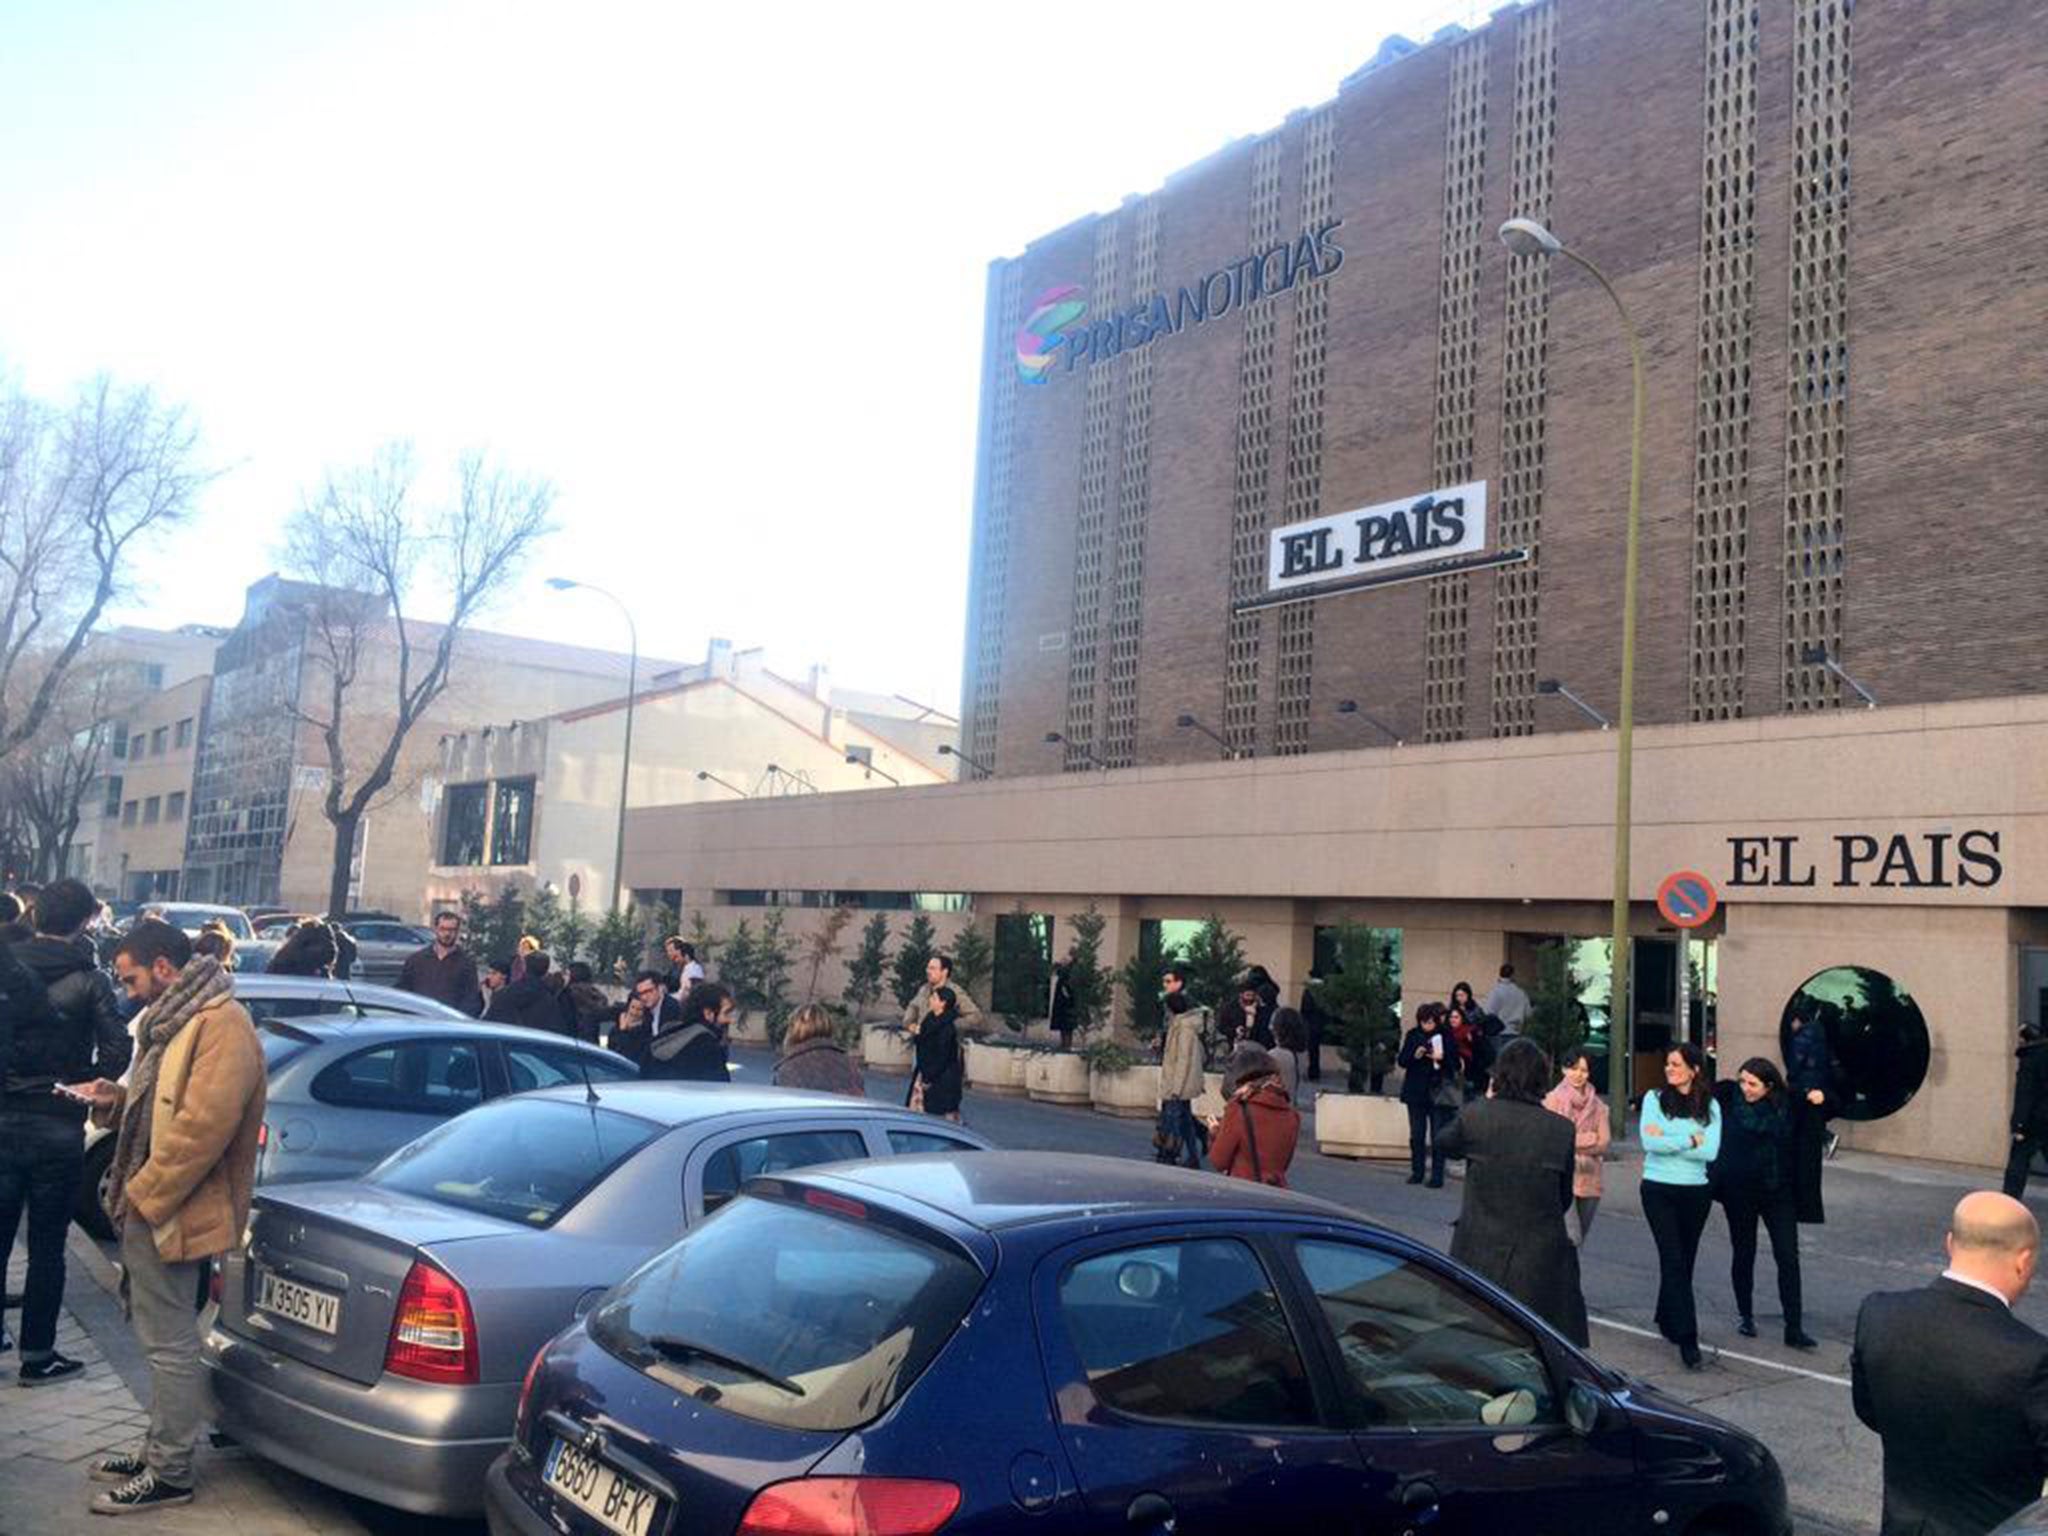 Prisa employees wait outside their office building after it was evacuated due to a suspicious package